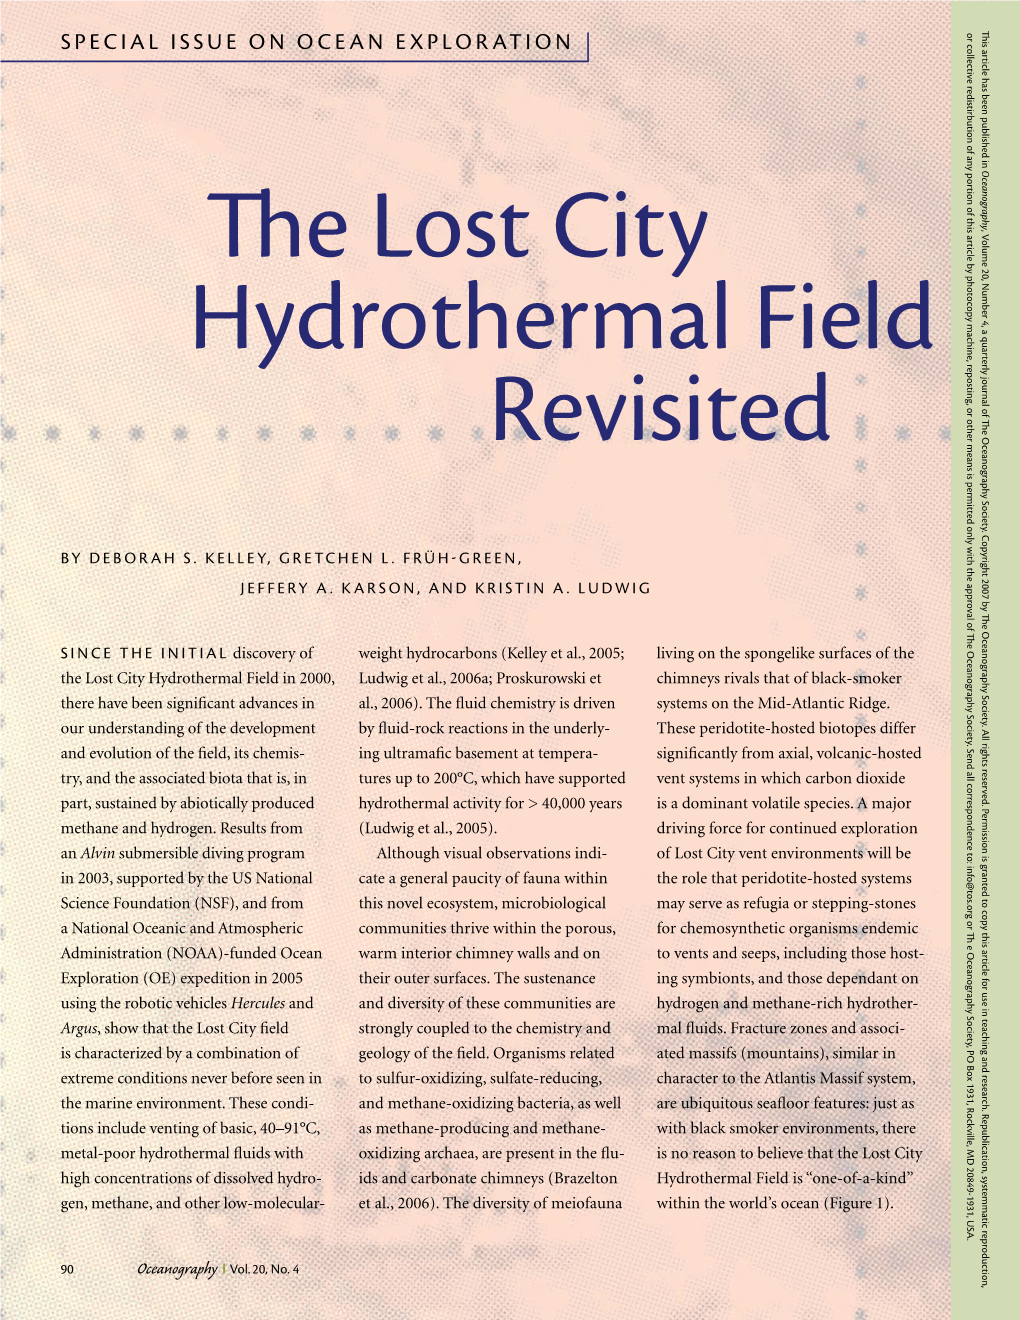 The Lost City Hydrothermal Field Revisited